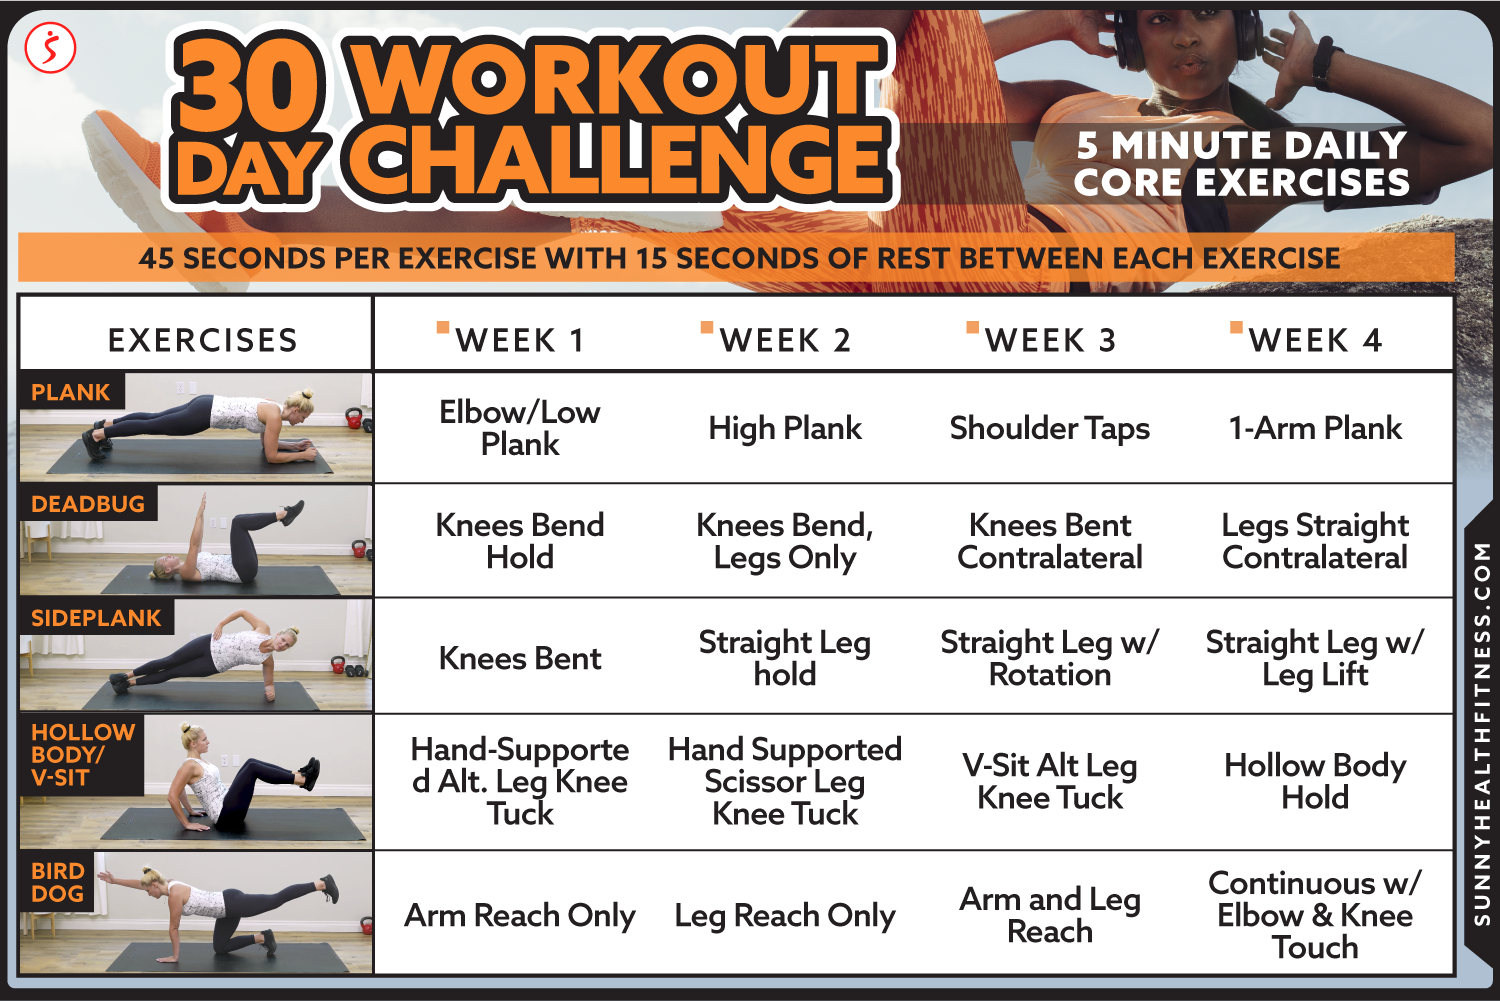 30-Day Core Workout Challenge for Better Fitness | Sunny Health and Fitness